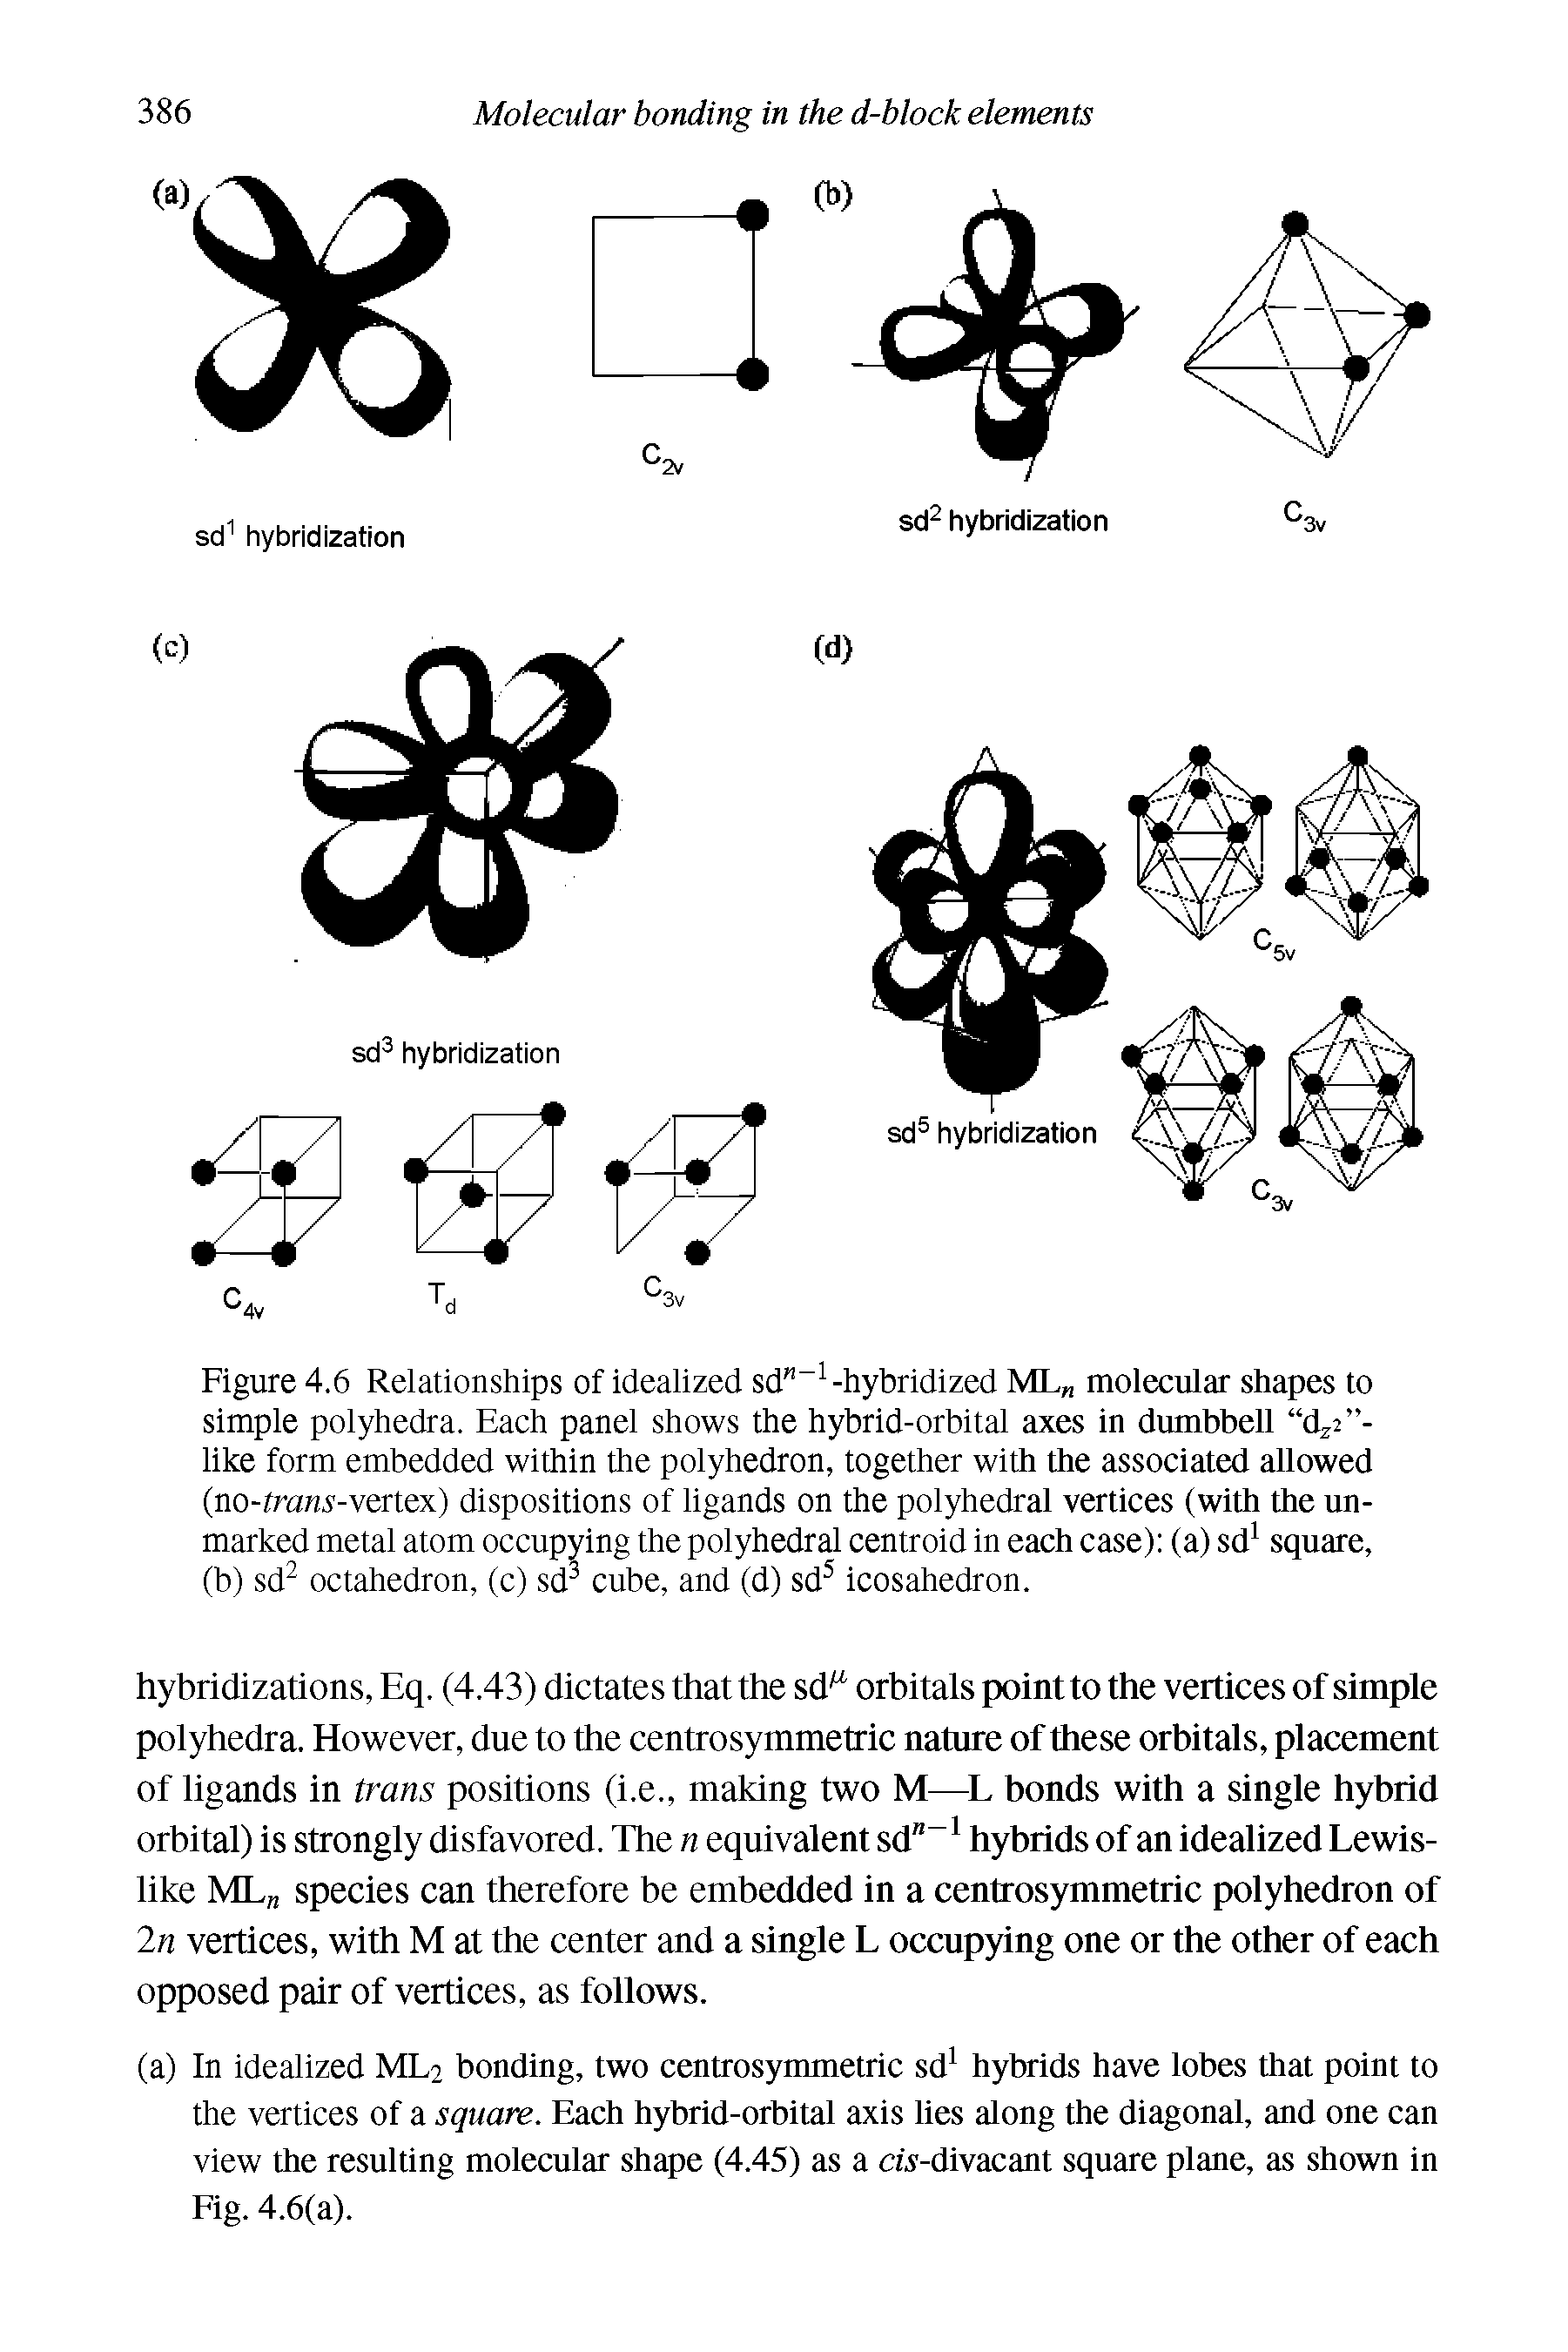 Figure 4.6 Relationships of idealized sd -1 -hybridized ML molecular shapes to simple polyhedra. Each panel shows the hybrid-orbital axes in dumbbell dz2 -like form embedded within the polyhedron, together with the associated allowed (no-hms-vertex) dispositions of ligands on the polyhedral vertices (with the unmarked metal atom occupying the polyhedral centroid in each case) (a) sd1 square, (b) sd2 octahedron, (c) sd3 cube, and (d) sd5 icosahedron.